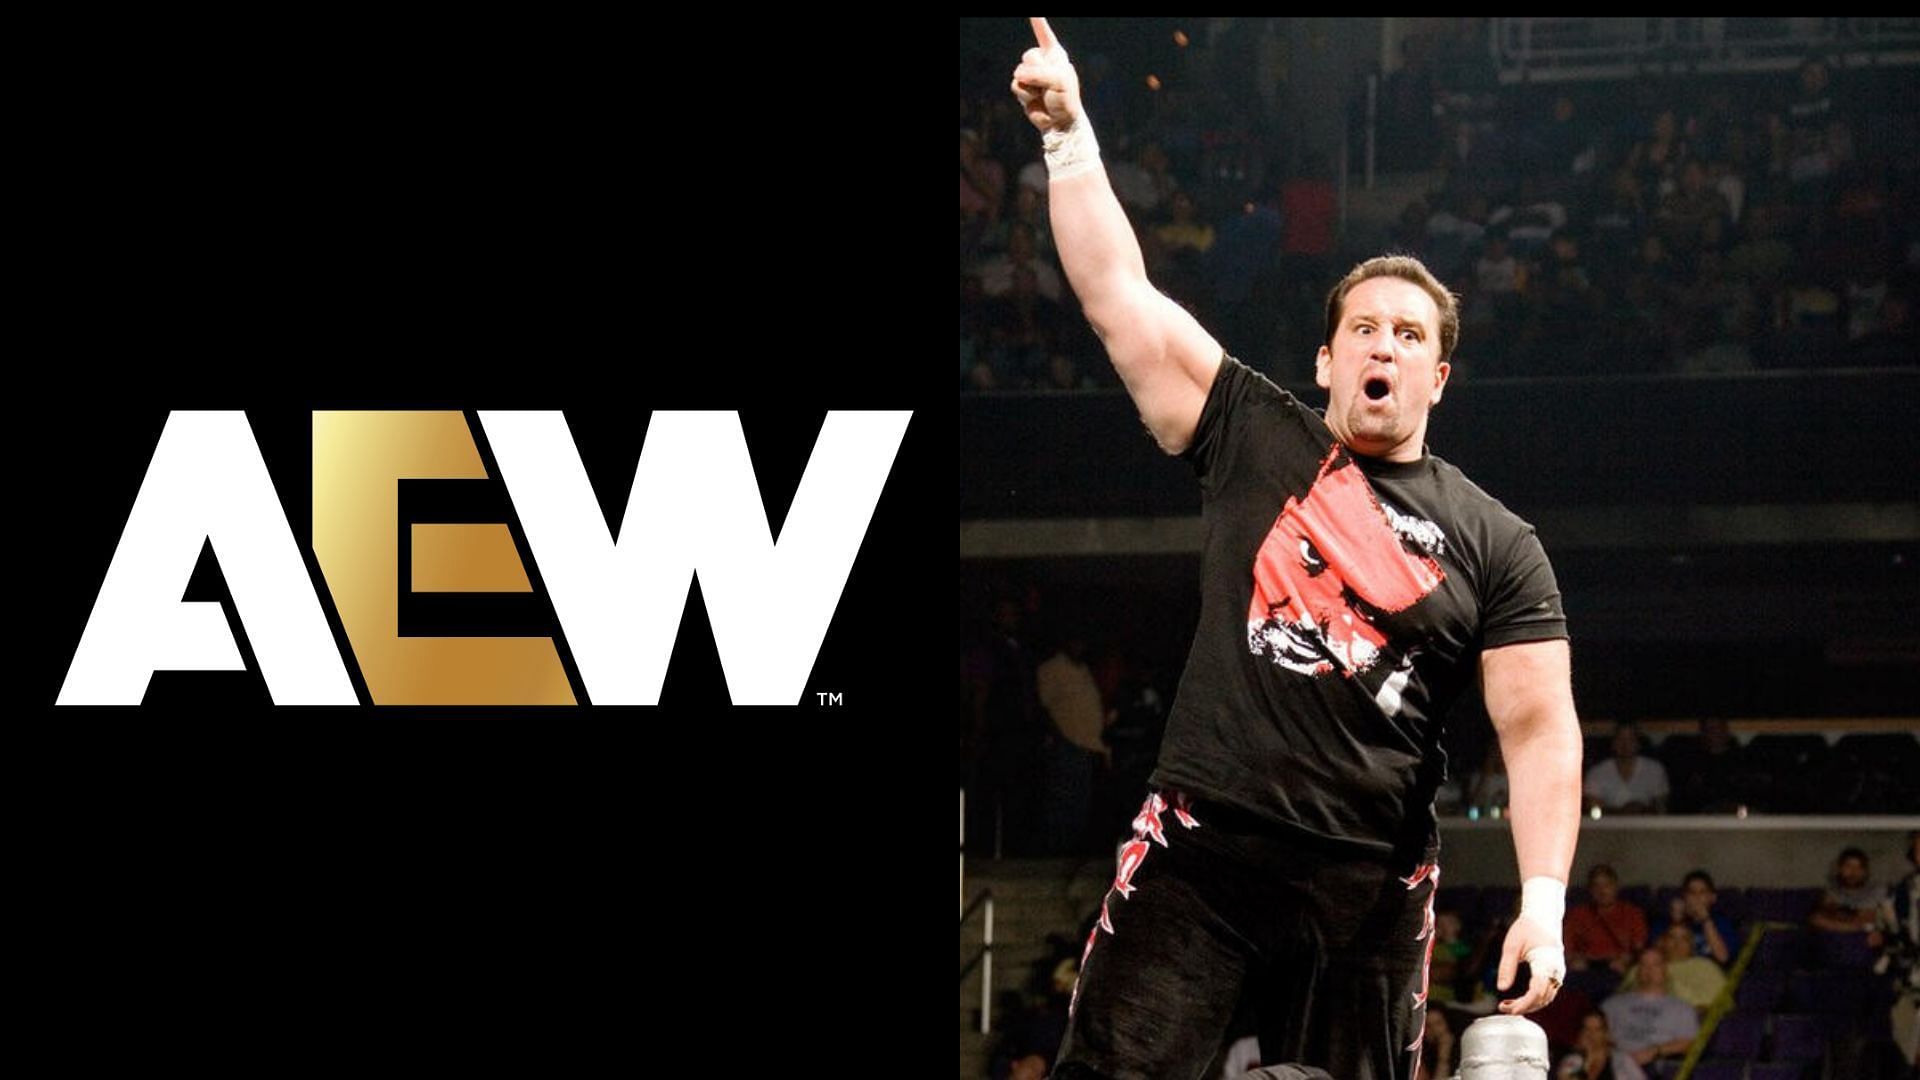 Tommy Dreamer is an ECW icon [Photo courtesy of WWE